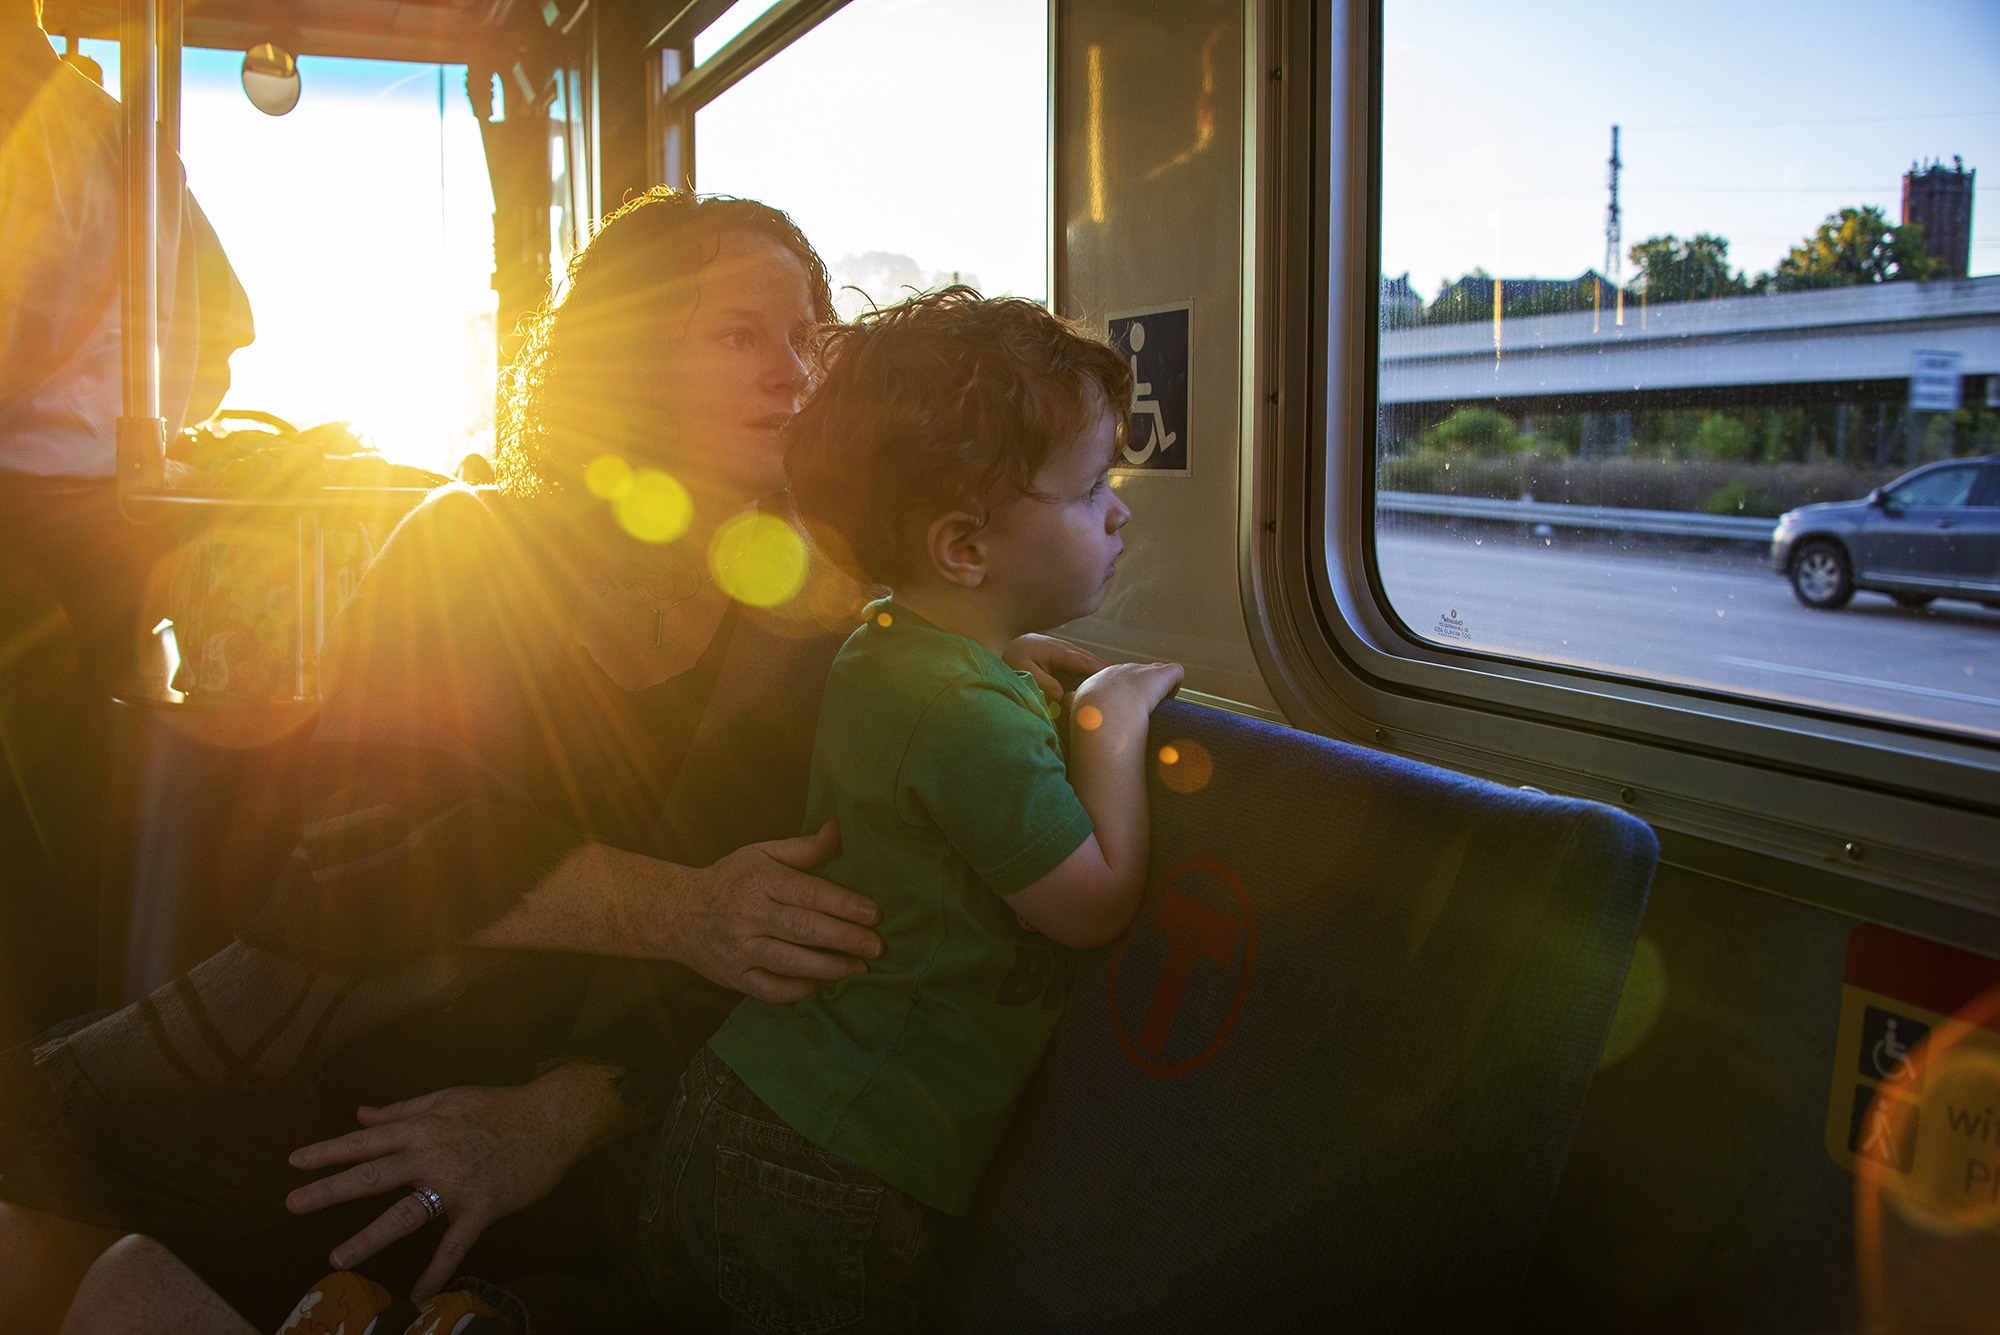 Terry Crunk and her son Finn, riding Route 758 during a recent commute to downtown Minneapolis.